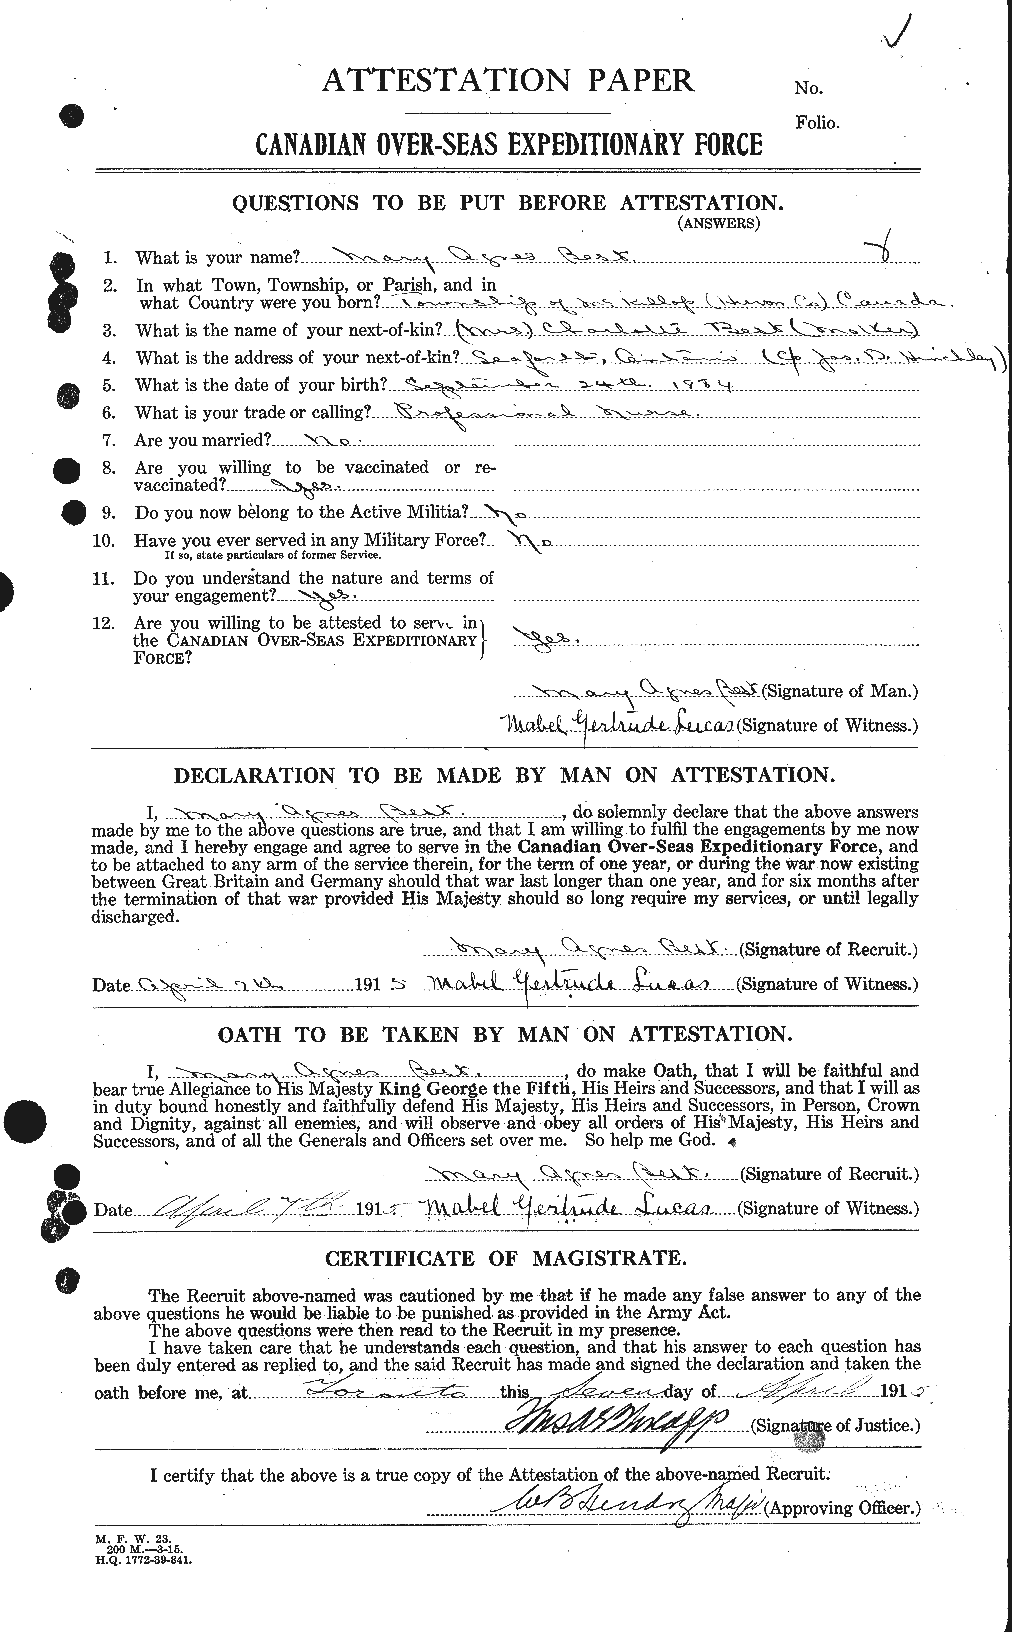 Personnel Records of the First World War - CEF 240310a